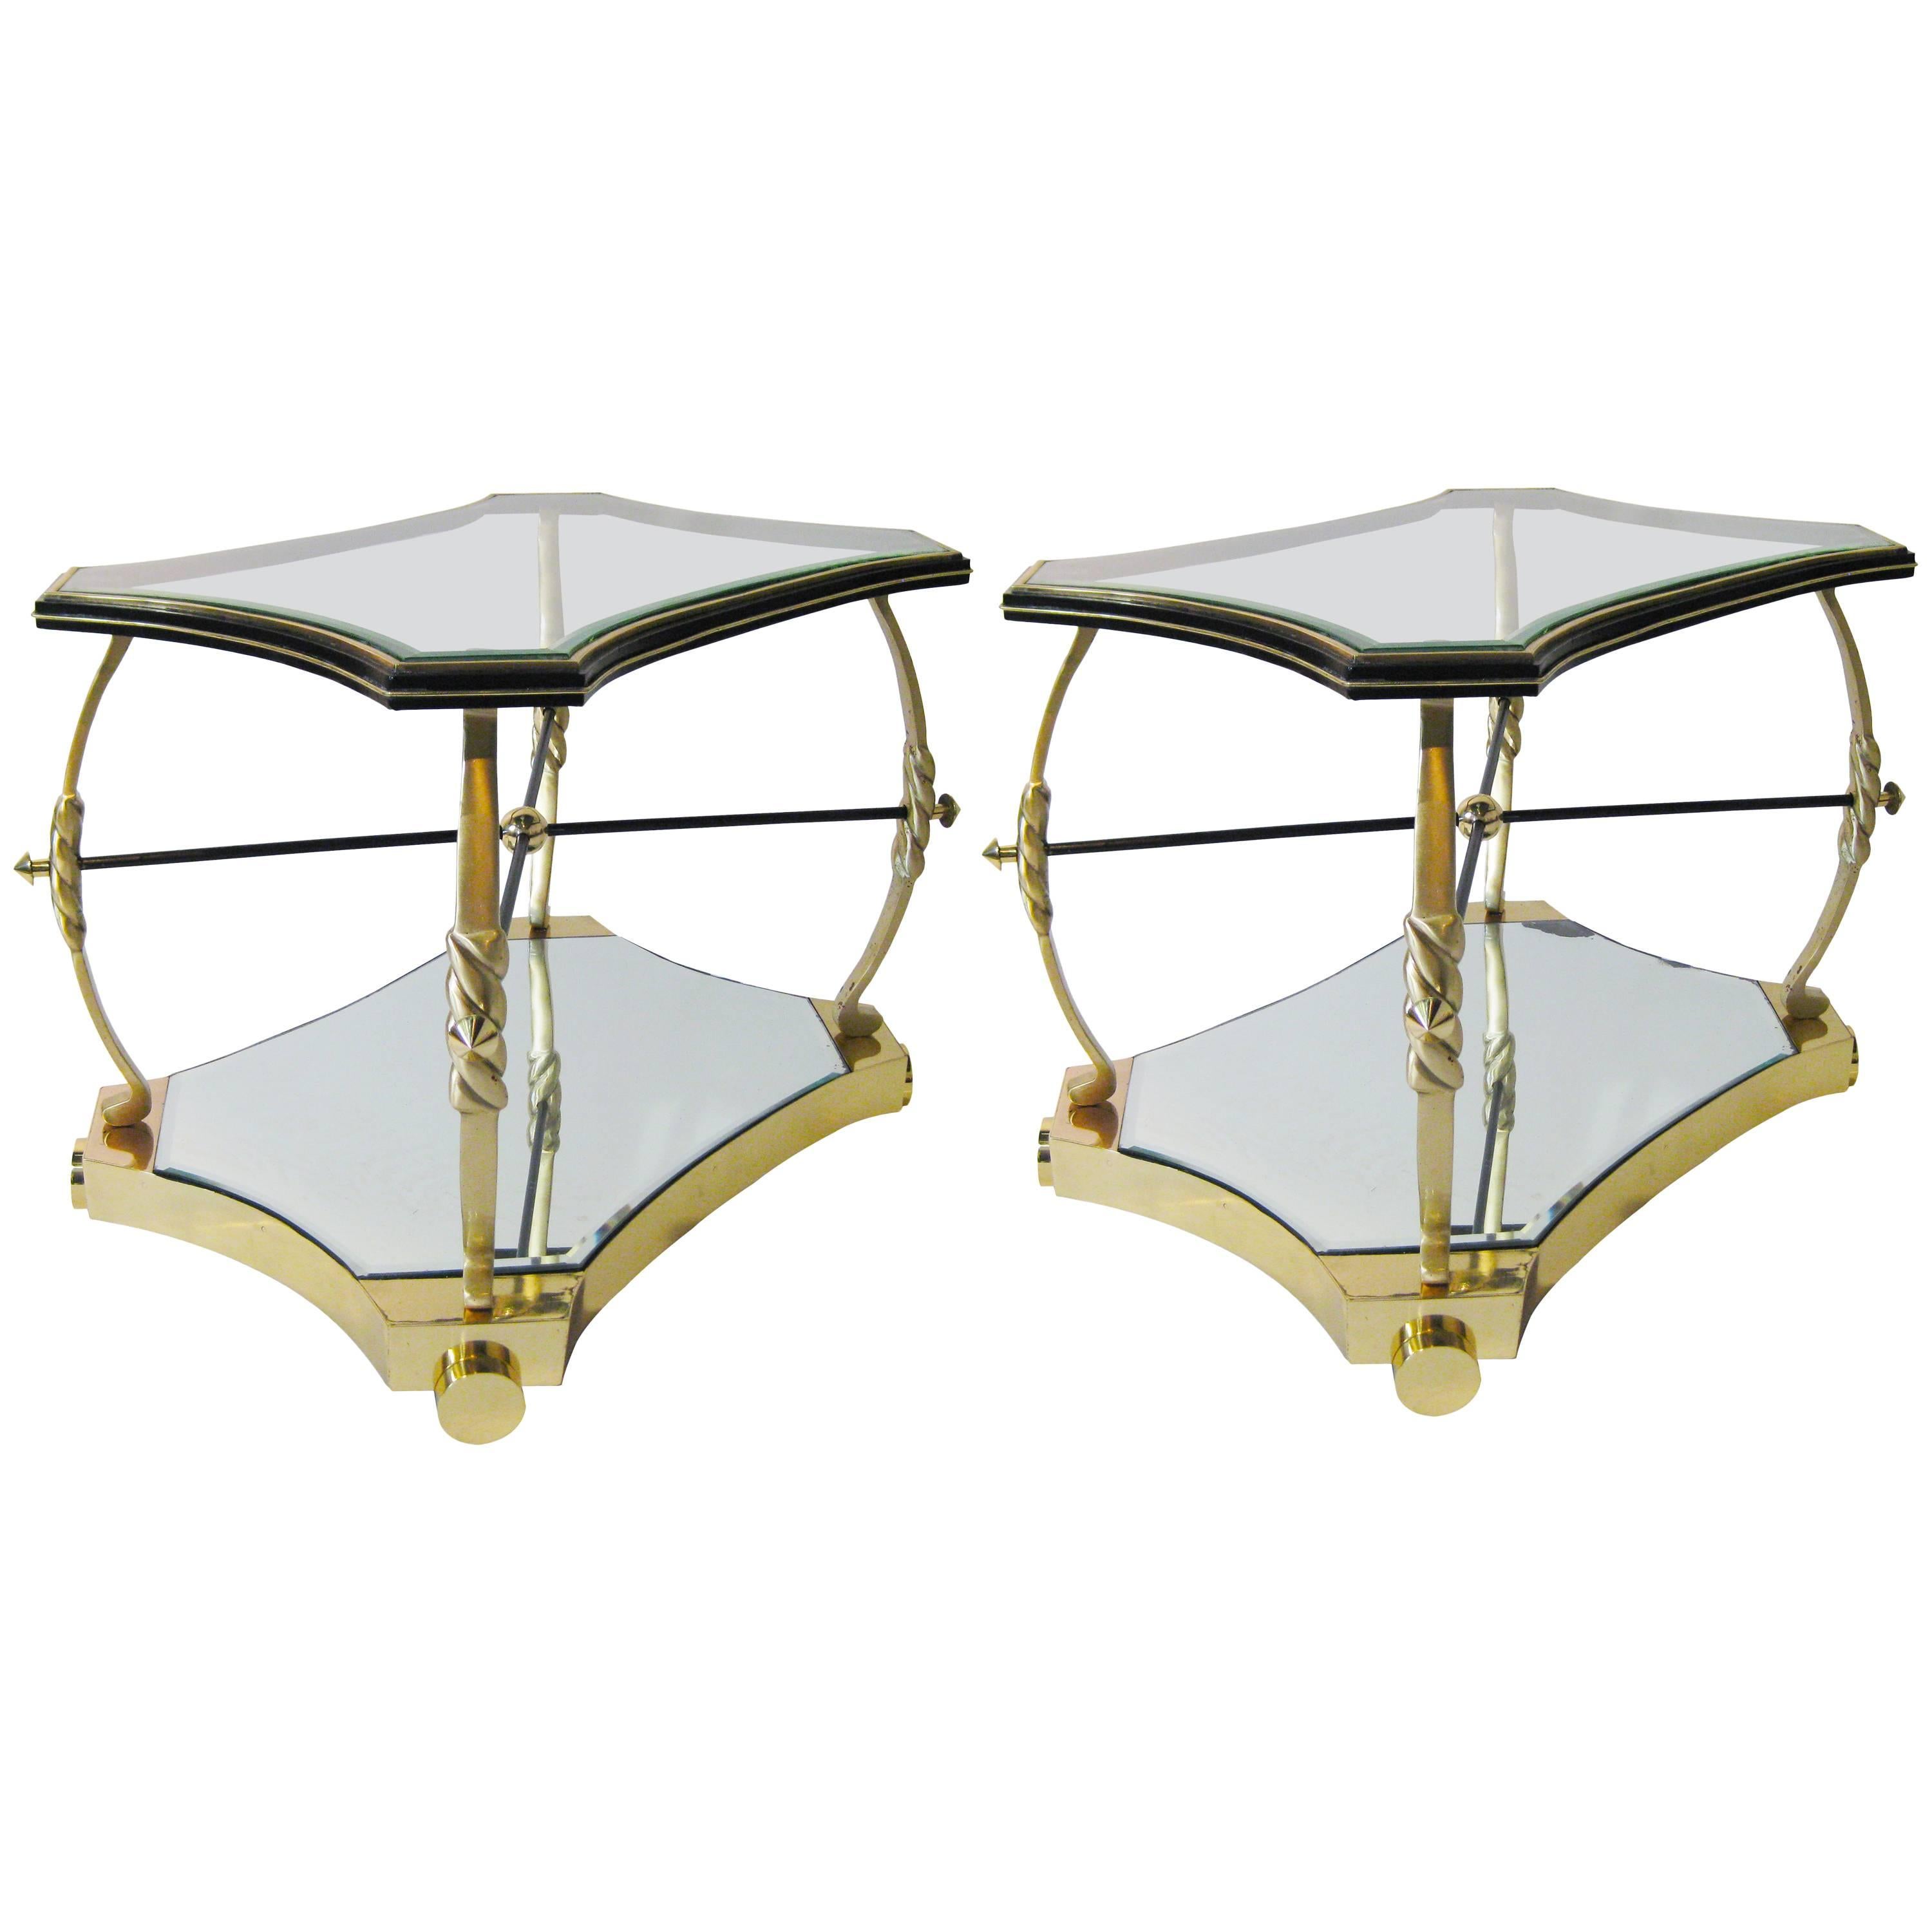 Pair of Side Tables Designed by Roberto and Mito Block, circa 1940